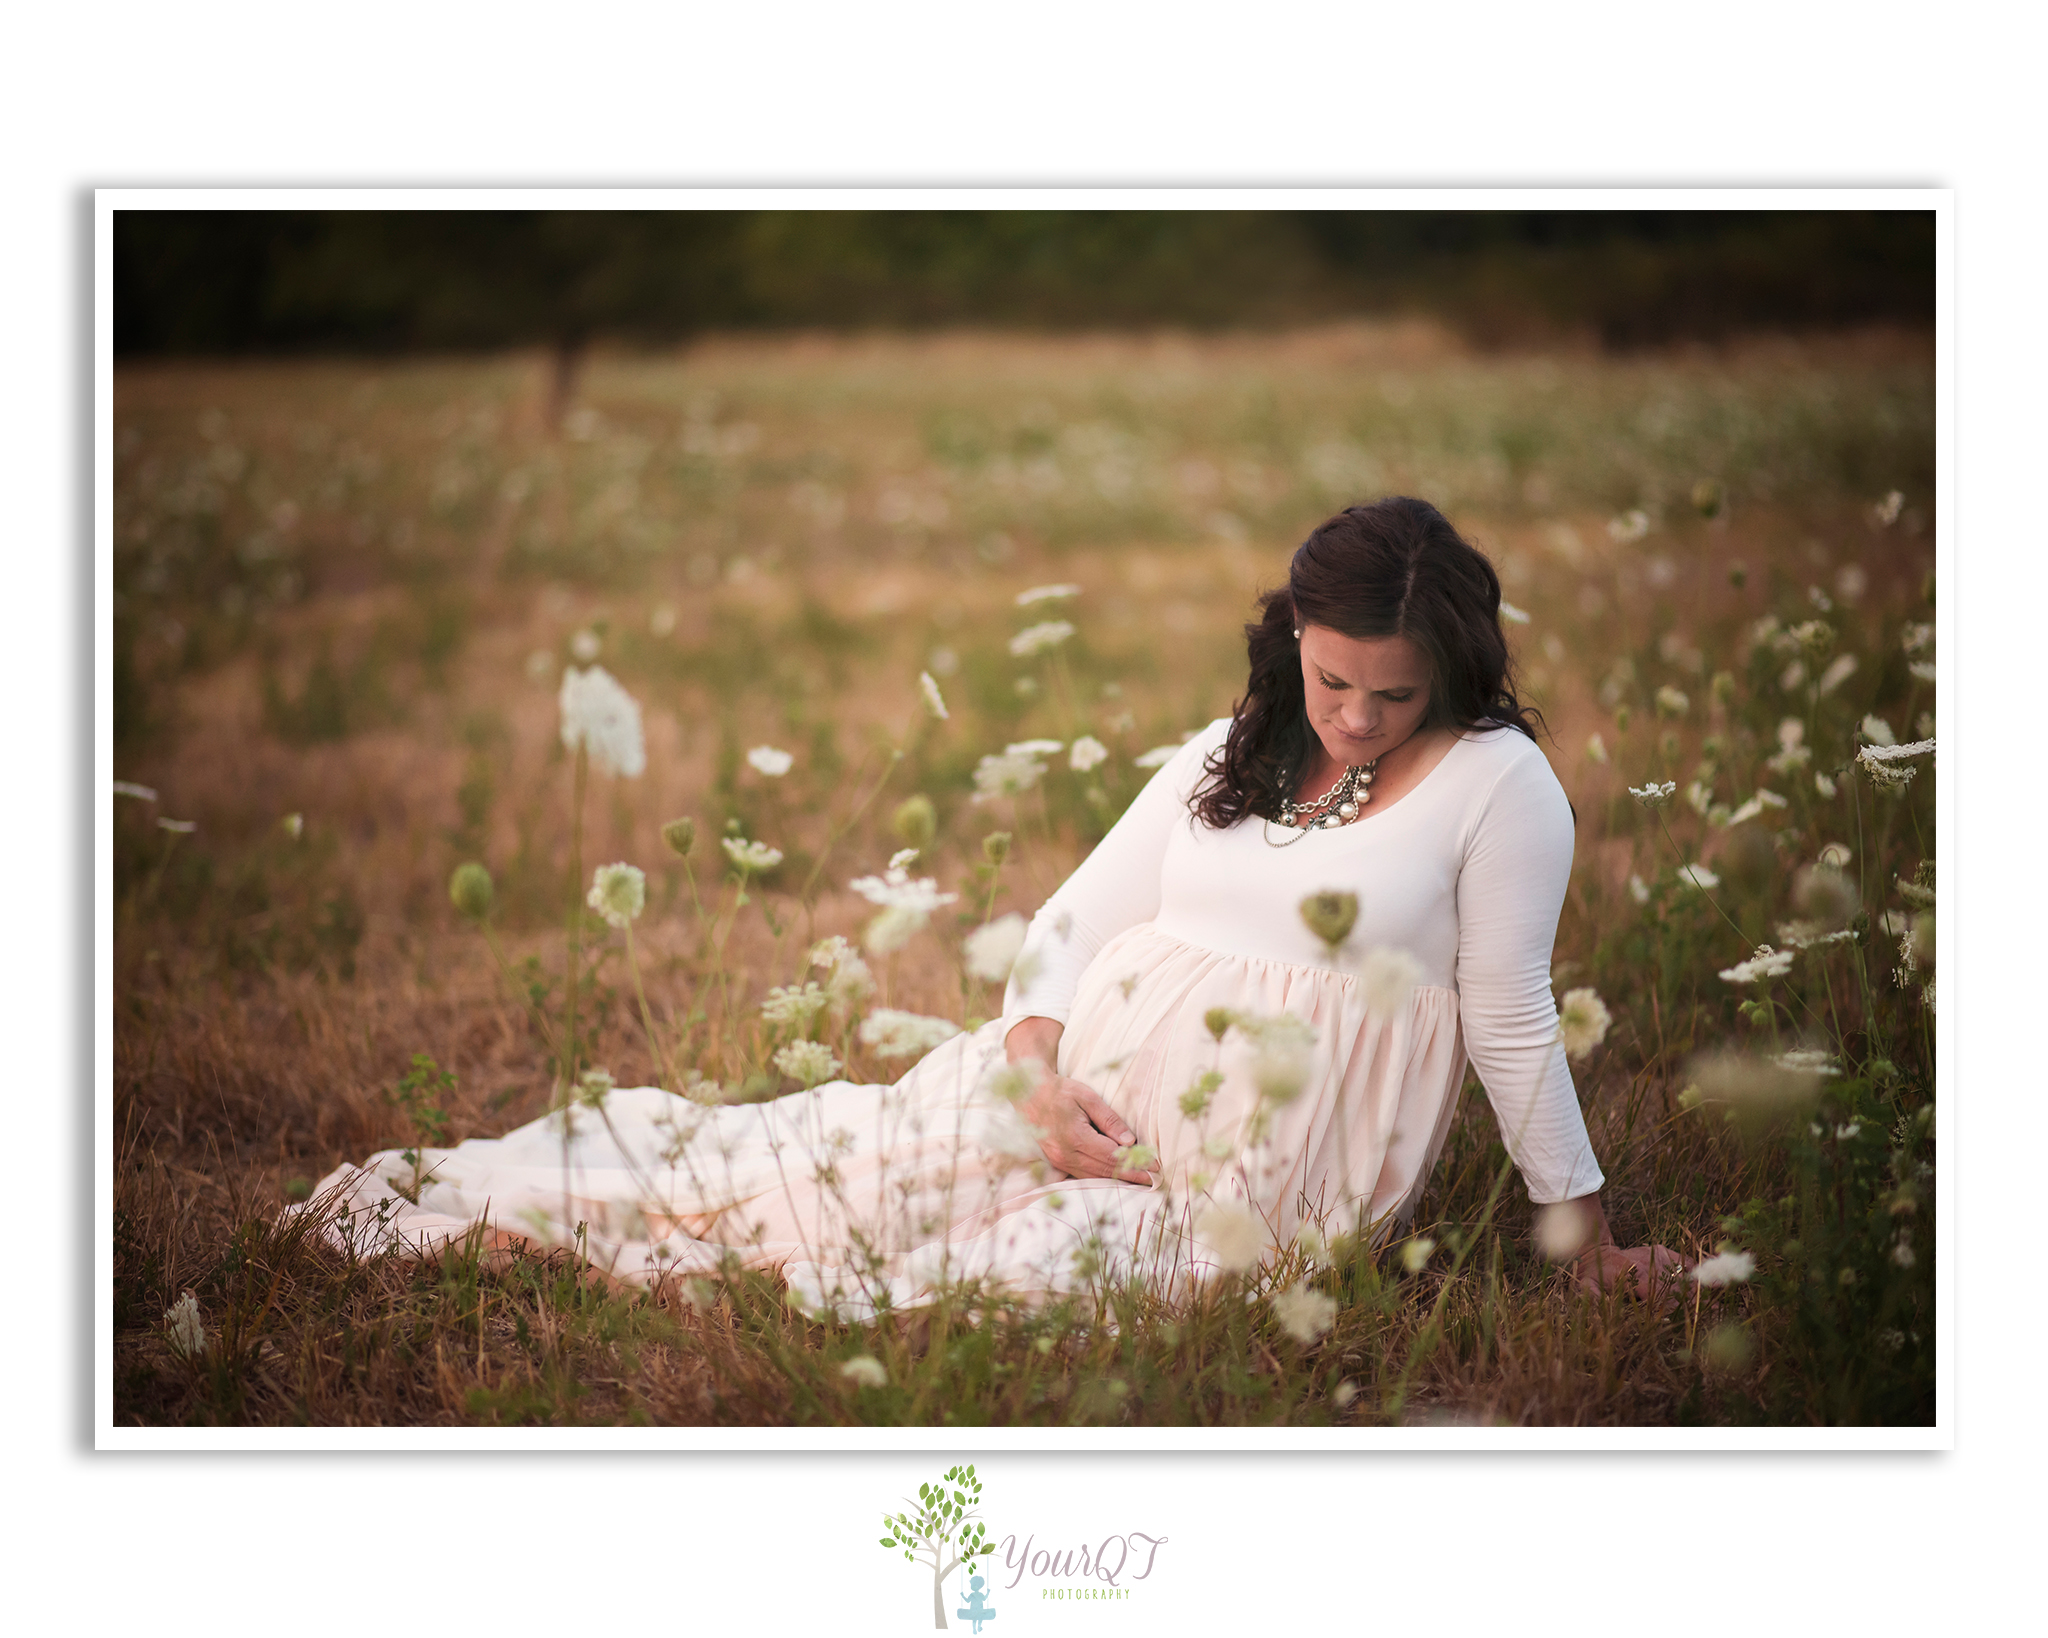 Carrie Maternity Portland Oregon Pink Blush Dress looking down in a field of flowers